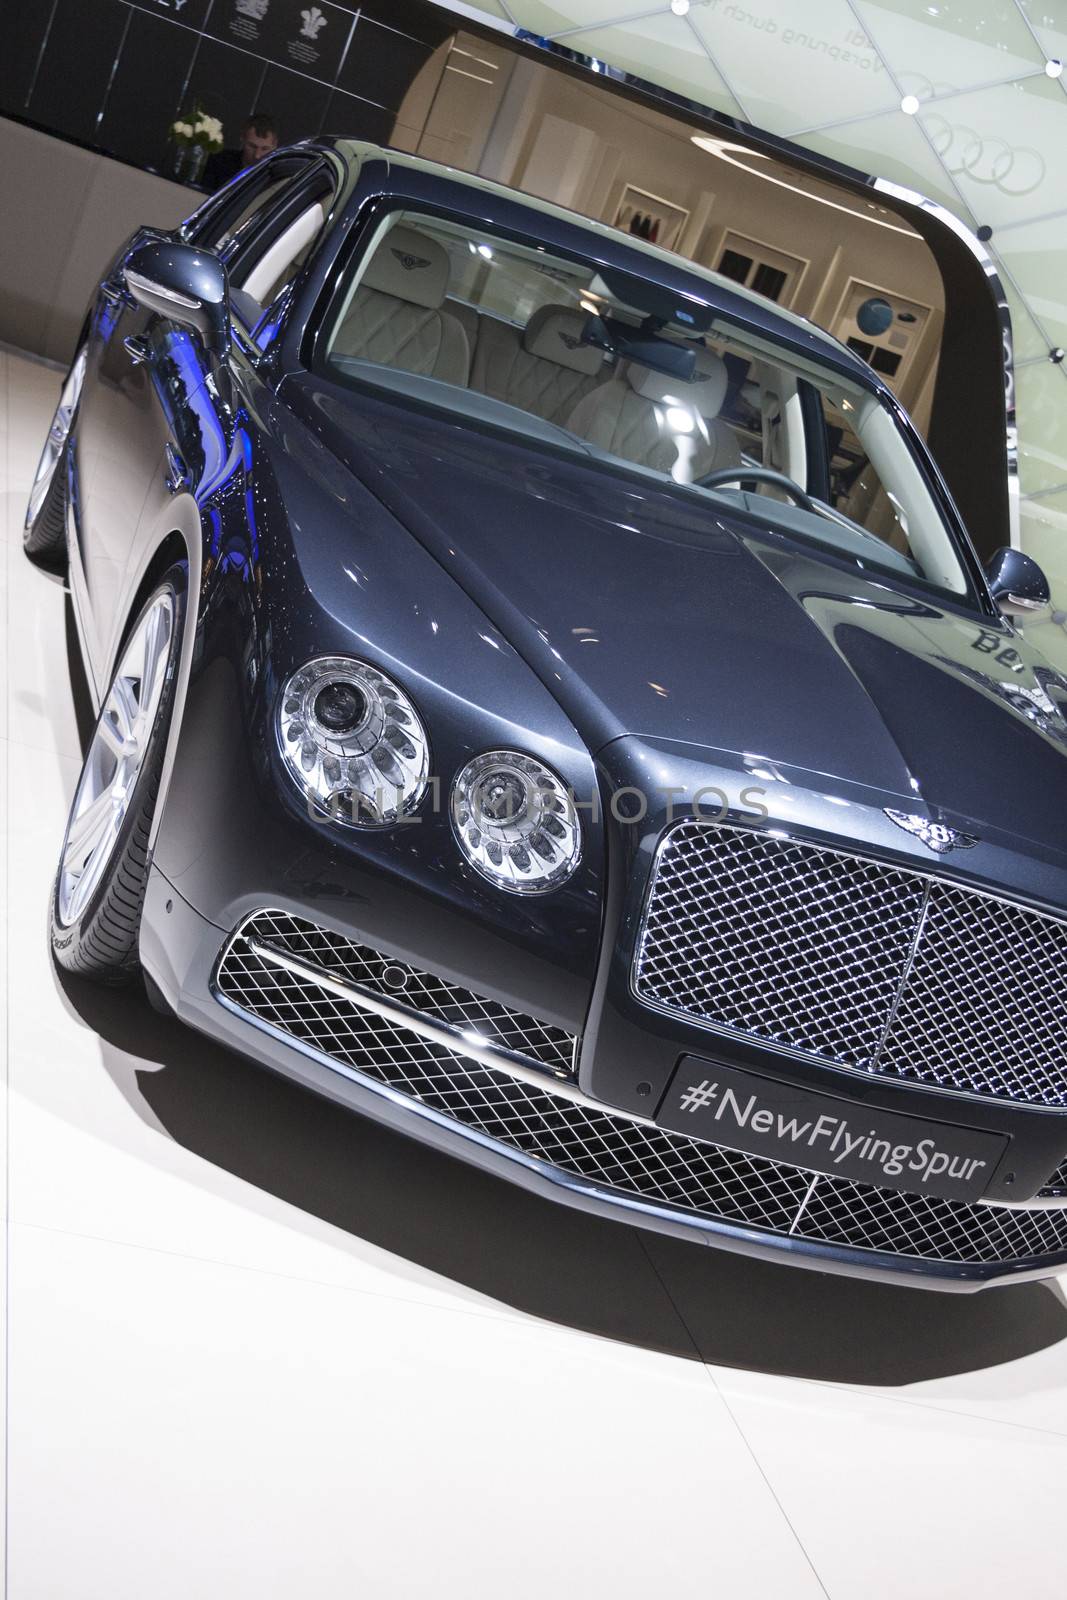 DETROIT - JANUARY 26 :The new 2015 Bentley Flying Spur at The No by snokid